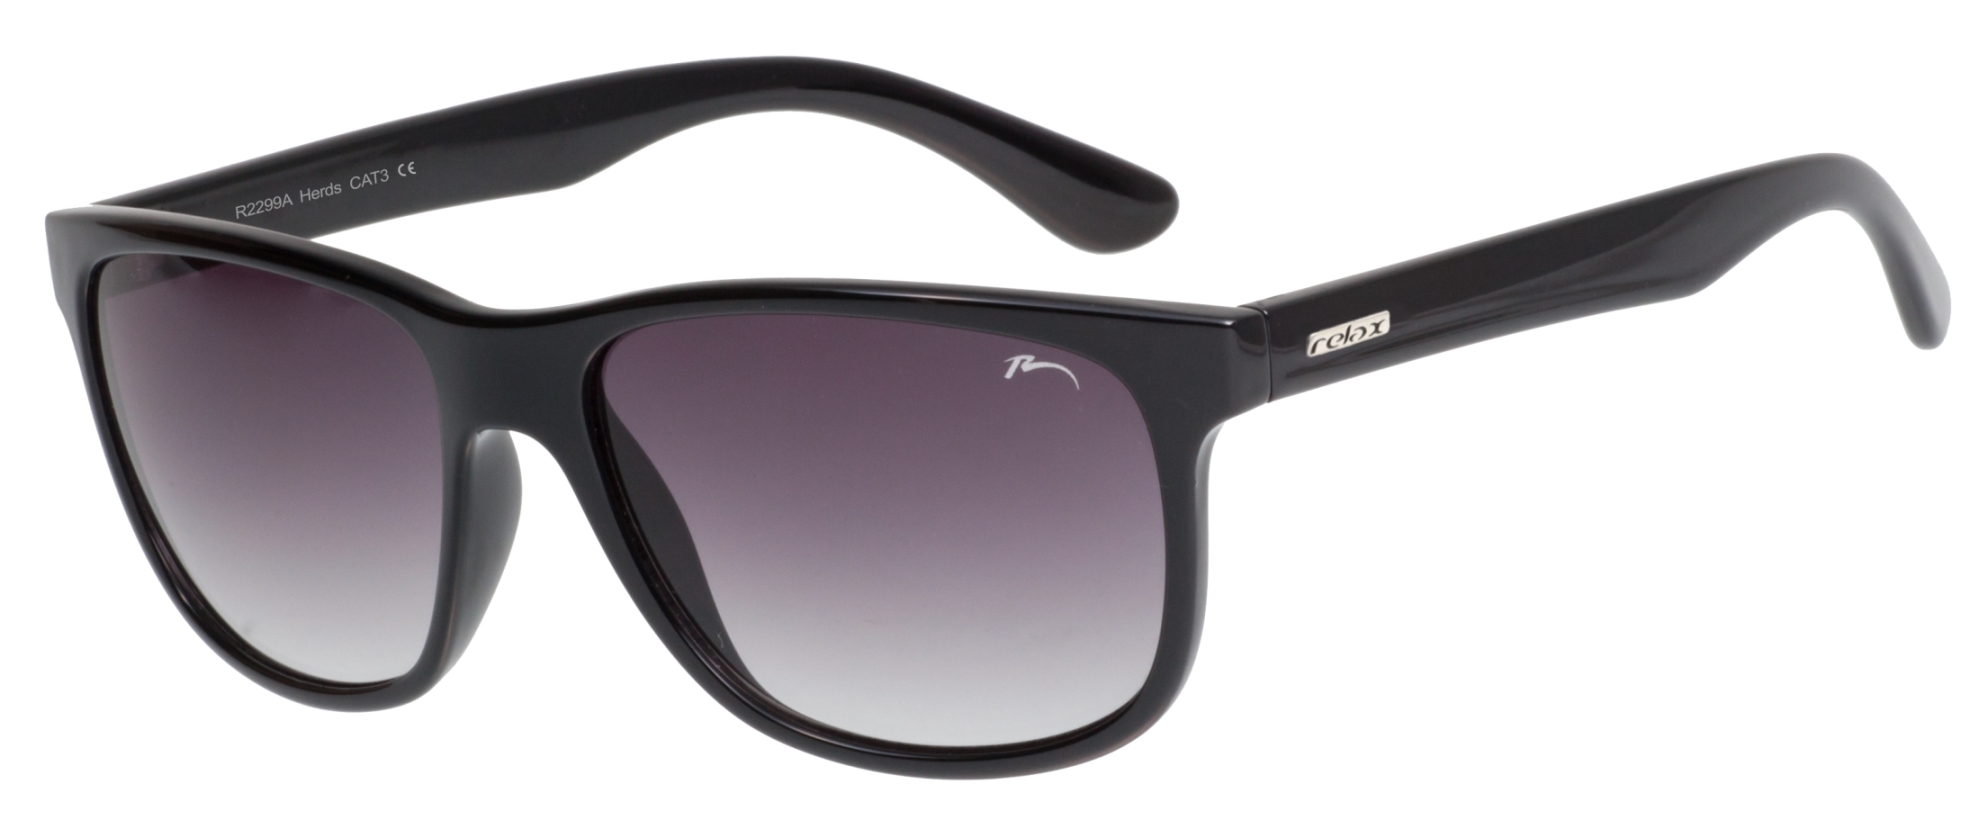 Polarized sunglasses  Relax Herds R2299A